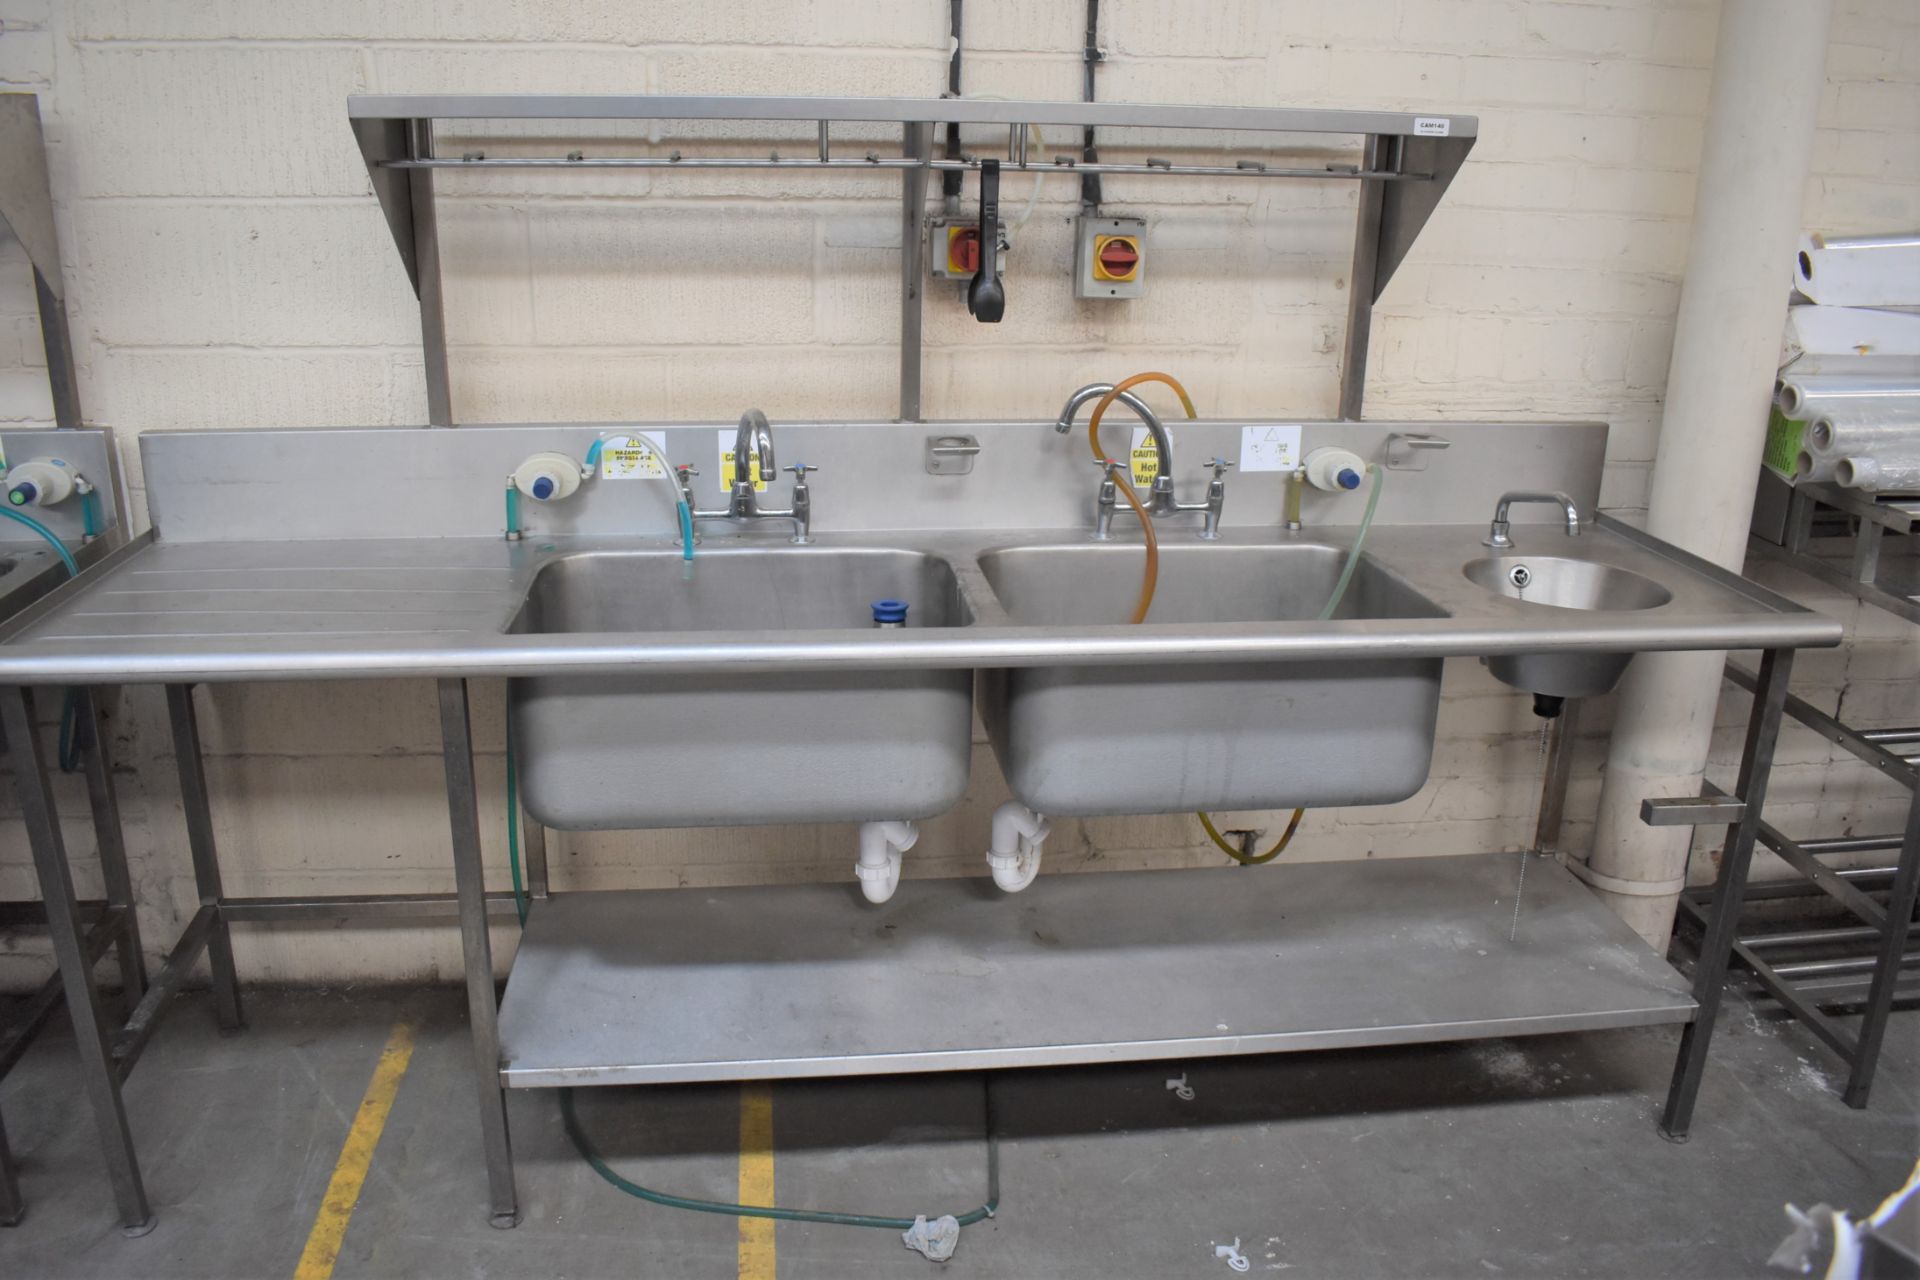 1 x Stainless Steel Commercial Wash Basin Unit With Twin Sink Bowl, Mixer Taps, Undershelf, Upstands